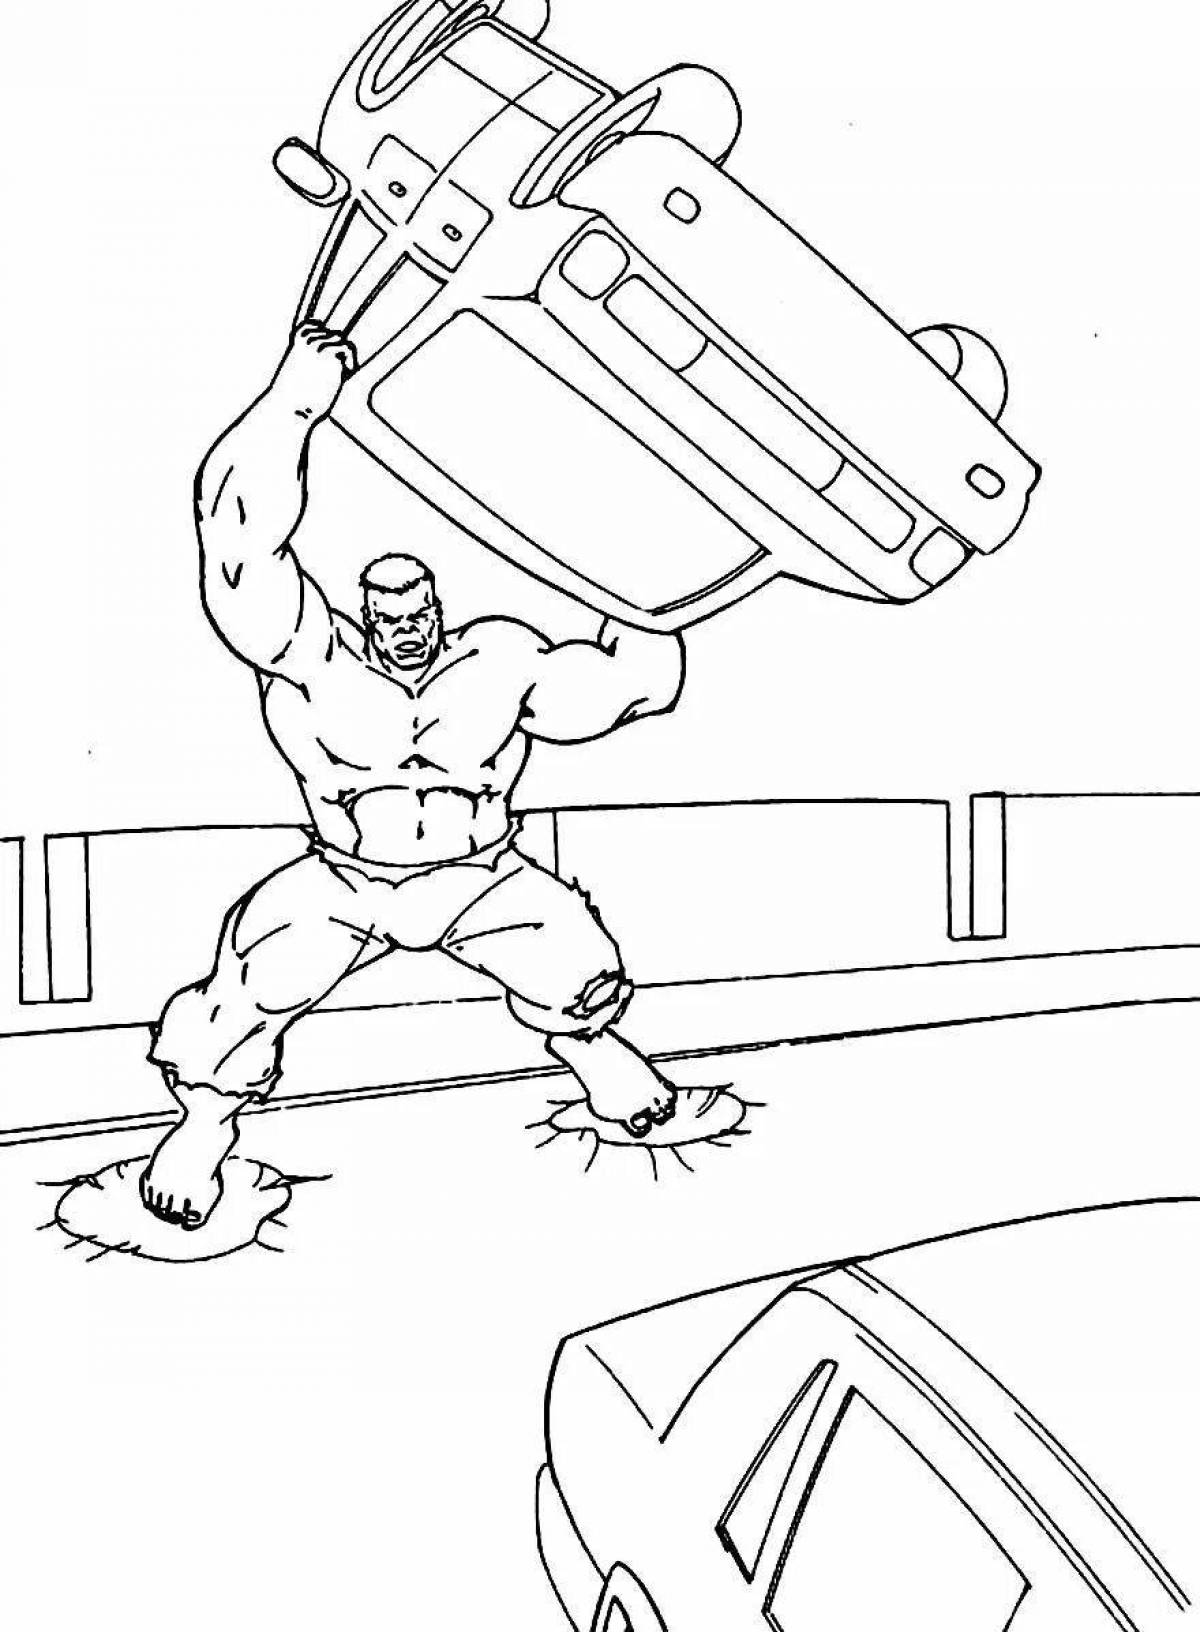 Attractive hulk coloring book for kids 6-7 years old